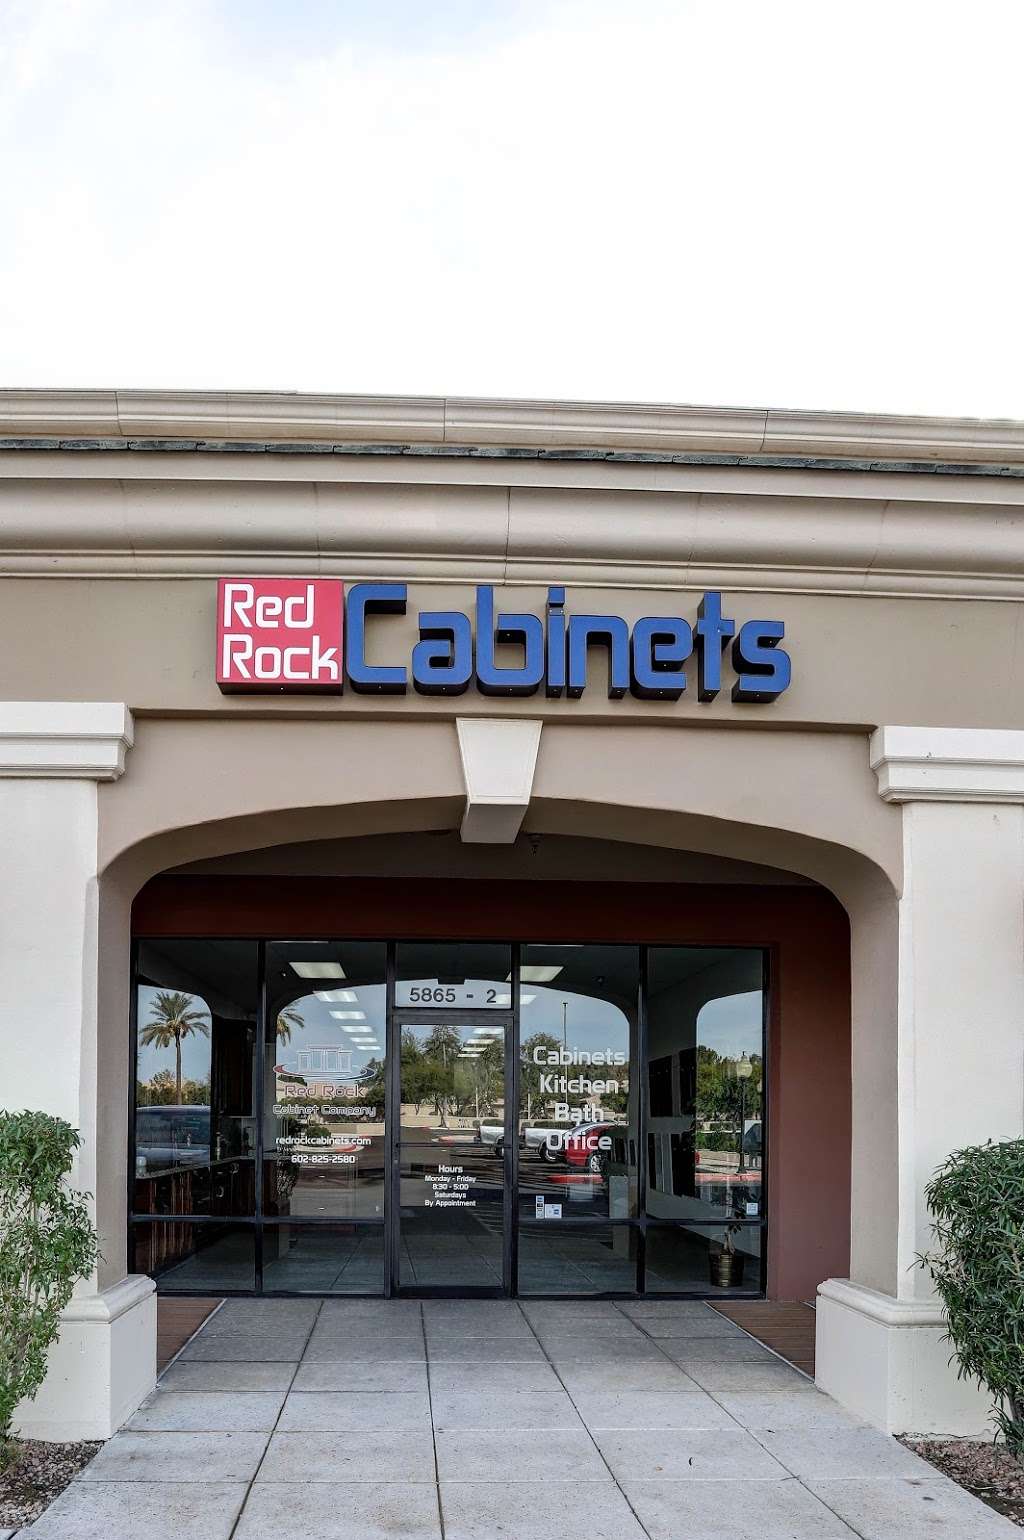 Red Rock Cabinets | 5865 W Ray Rd Suite 2, Chandler, AZ 85226, USA | Phone: (602) 825-2580